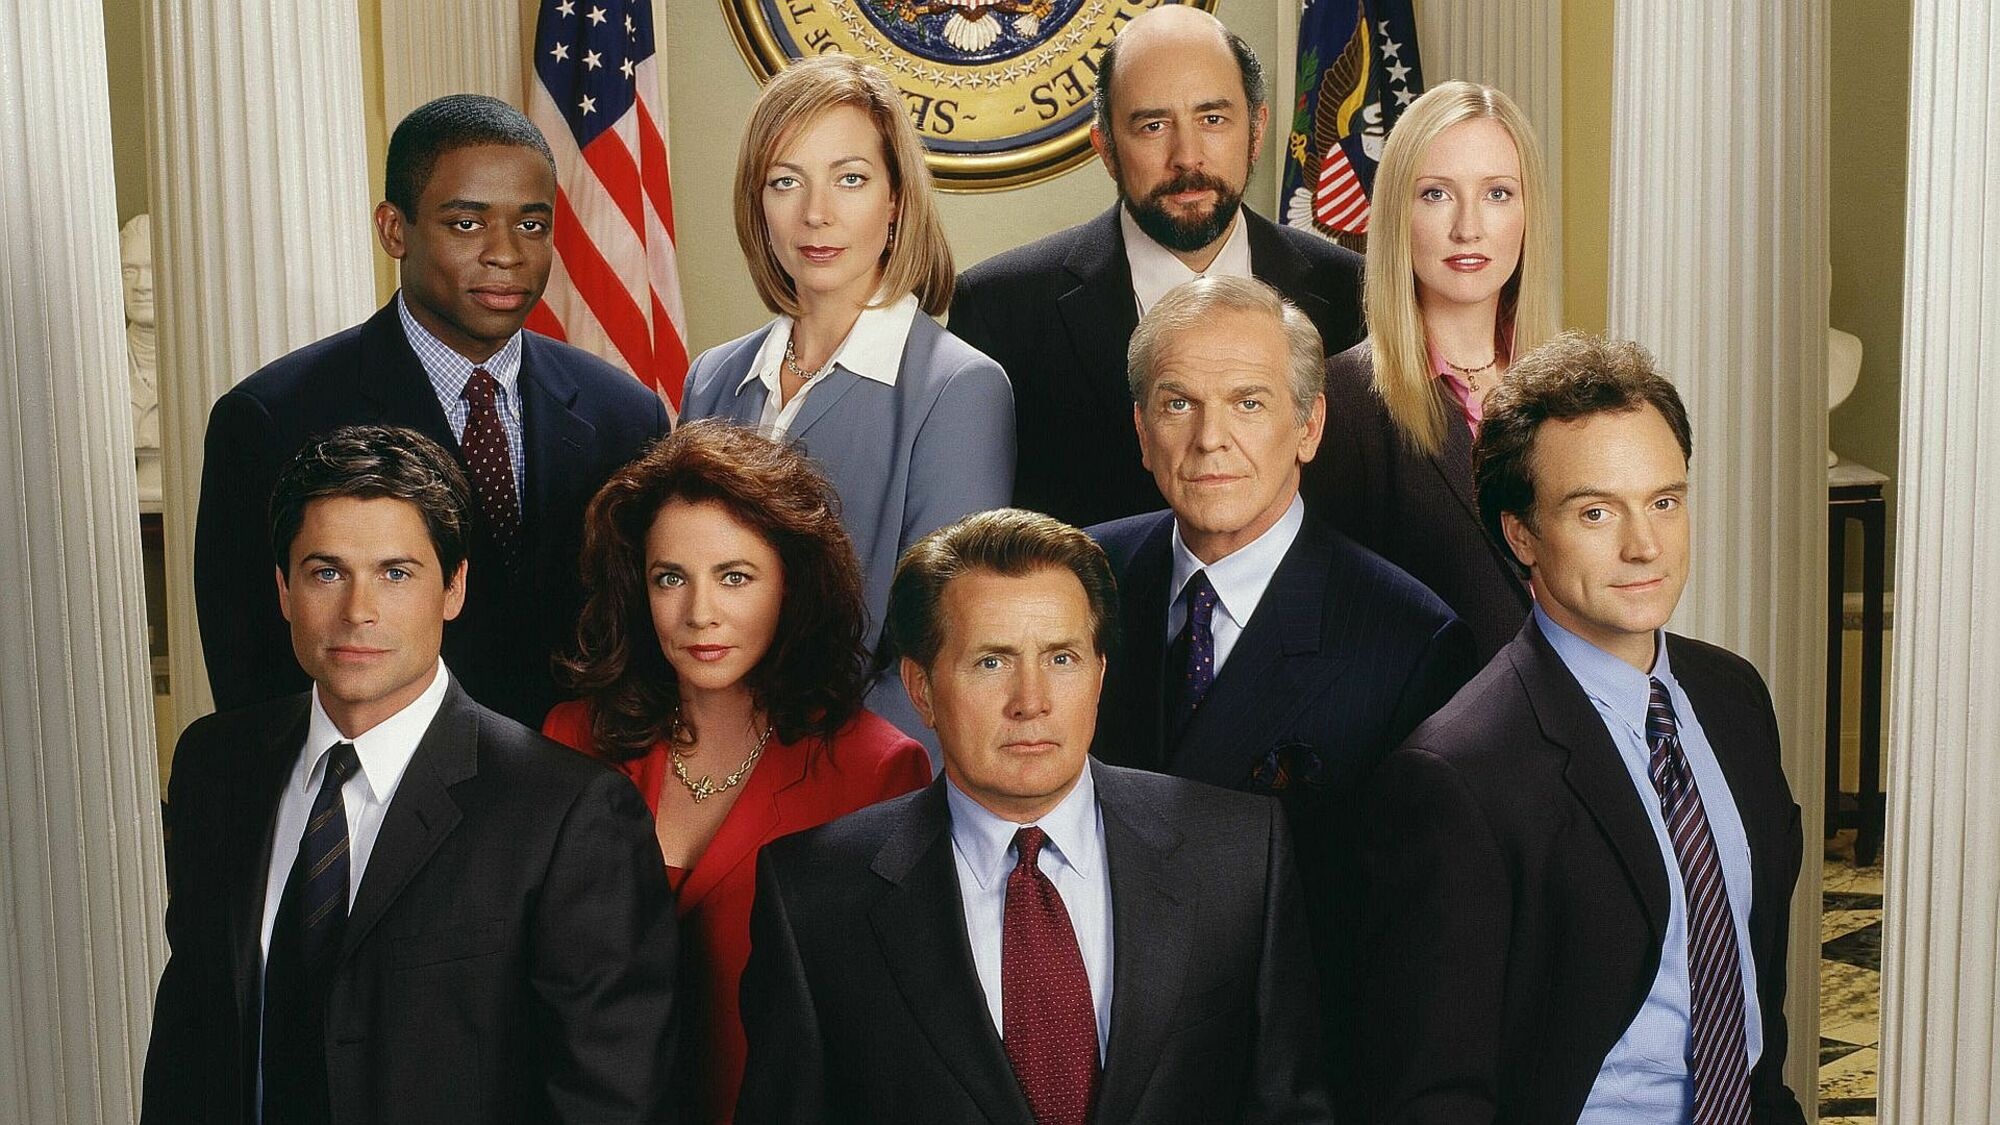 The West Wing (TV Series): Jed Bartlet, Leo McGarry, CJ Cregg, Donna Moss, Toby Ziegler, The leading characters. 2000x1130 HD Wallpaper.